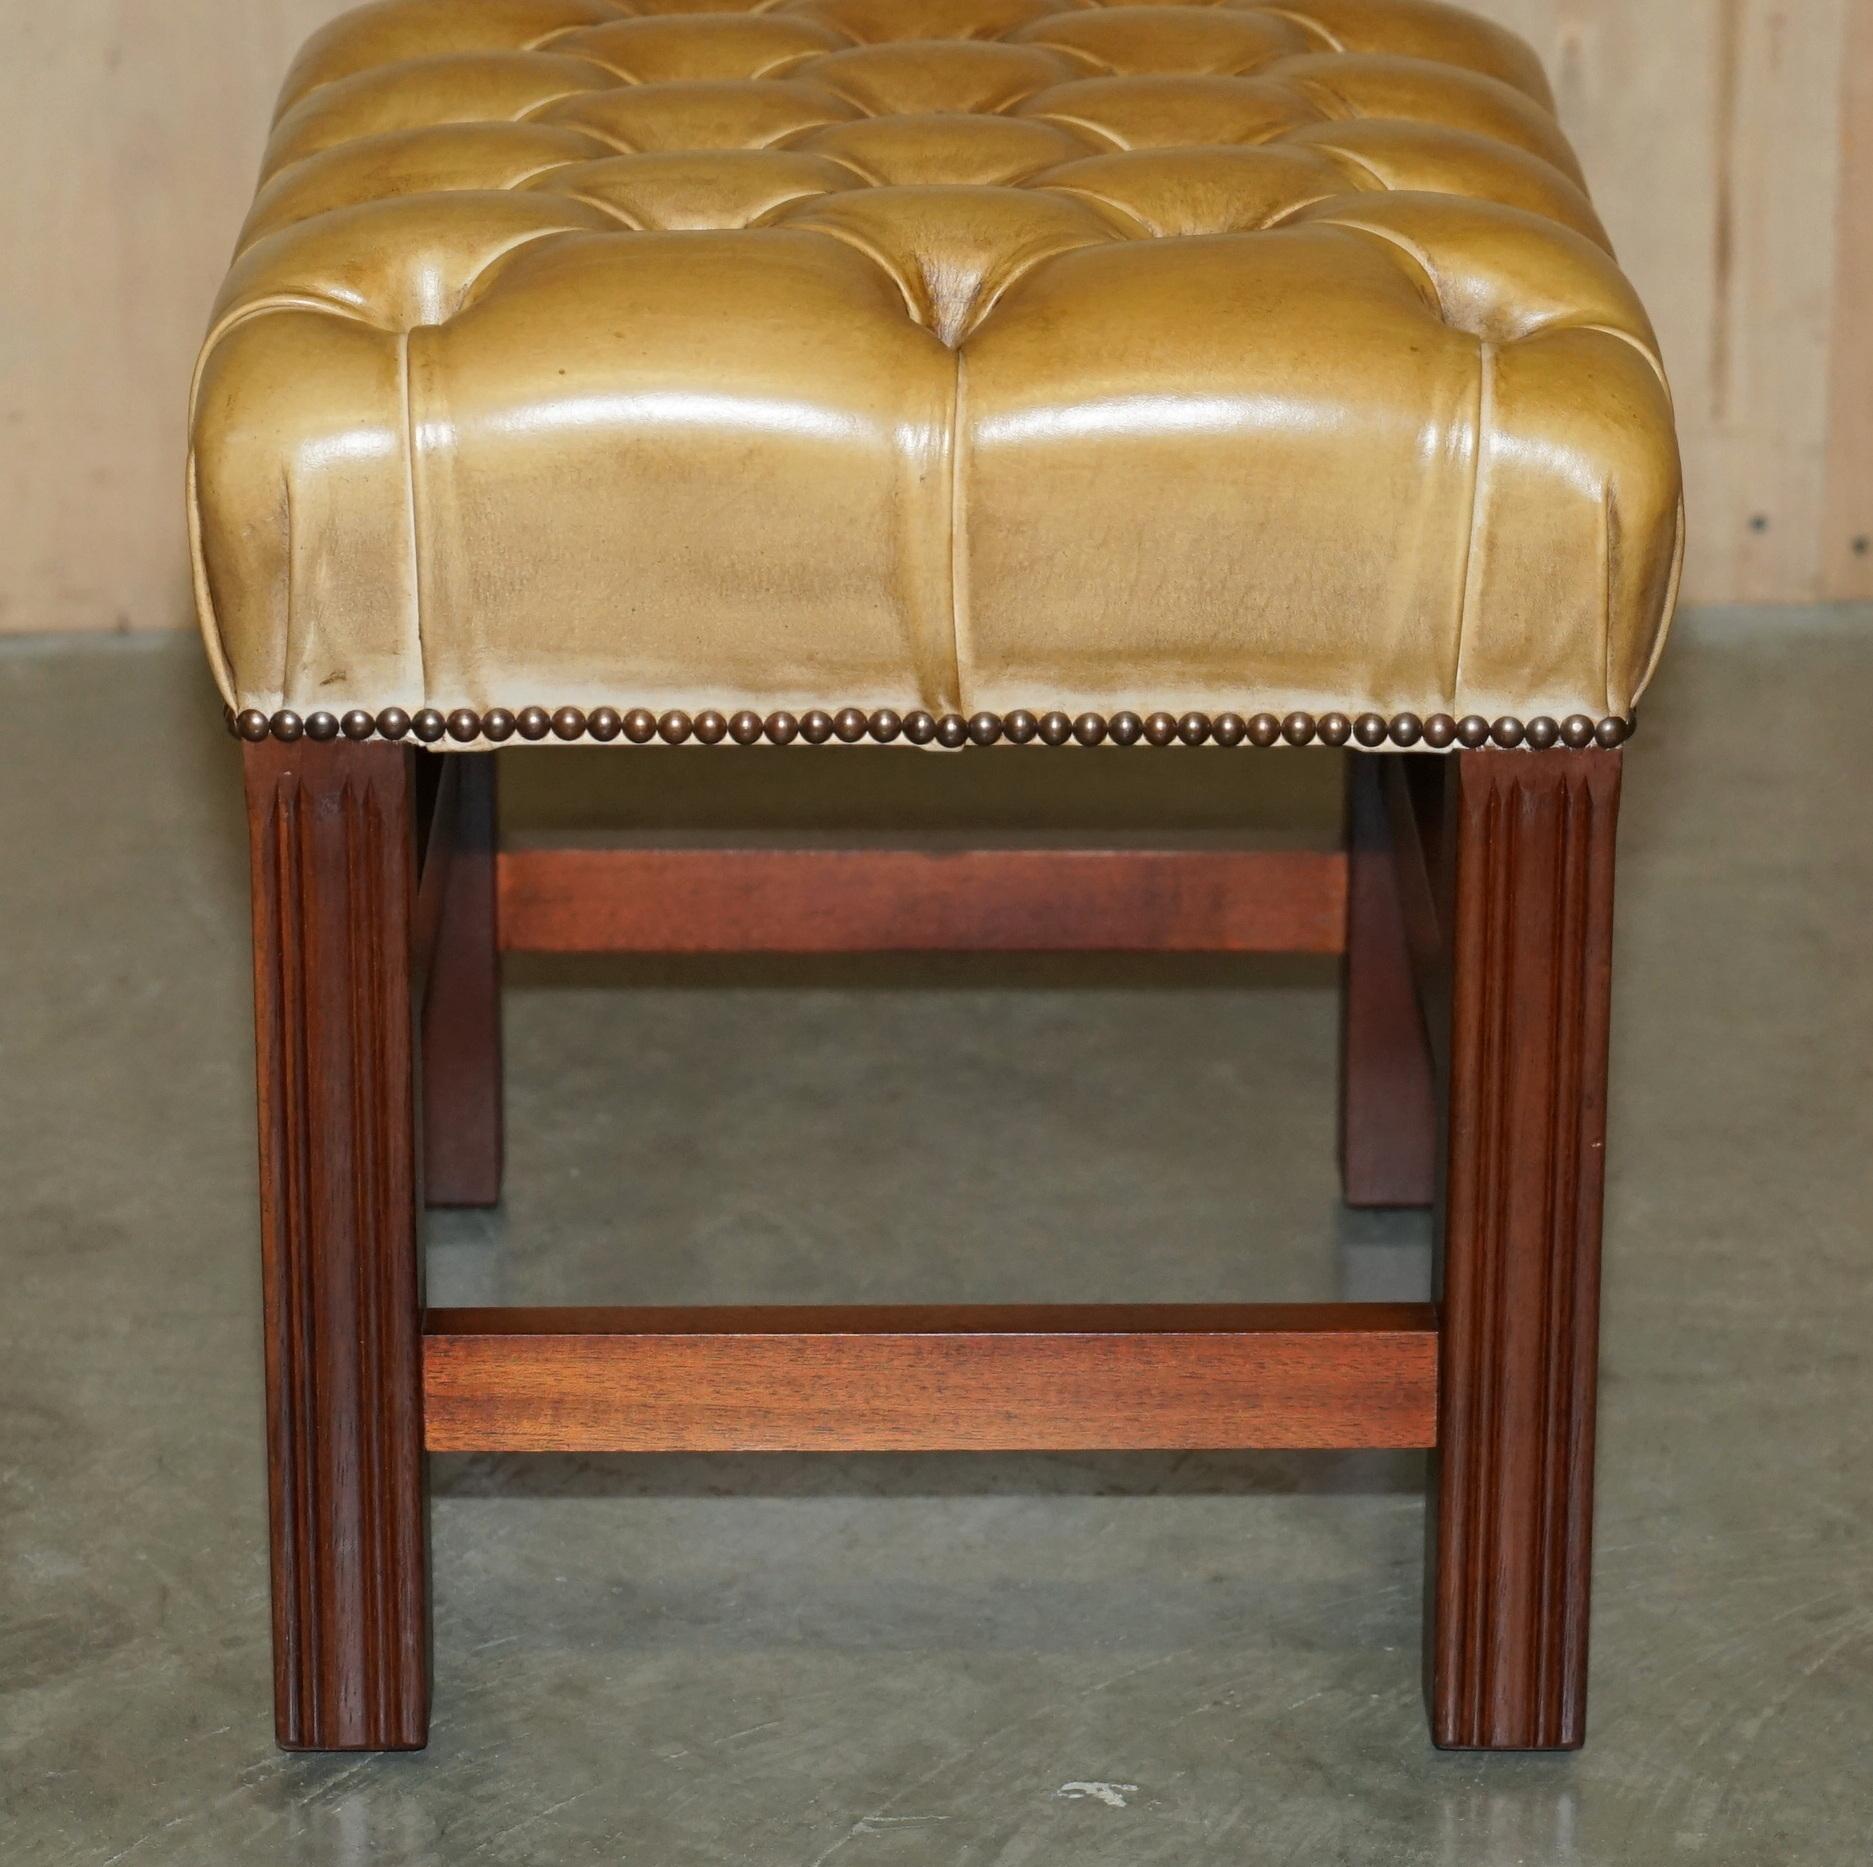 Leather VINTAGE TAN BROWN LEATHER CHESTERFIELD TUFTED BARON FOOTSTOOL PART OF SUiTE For Sale